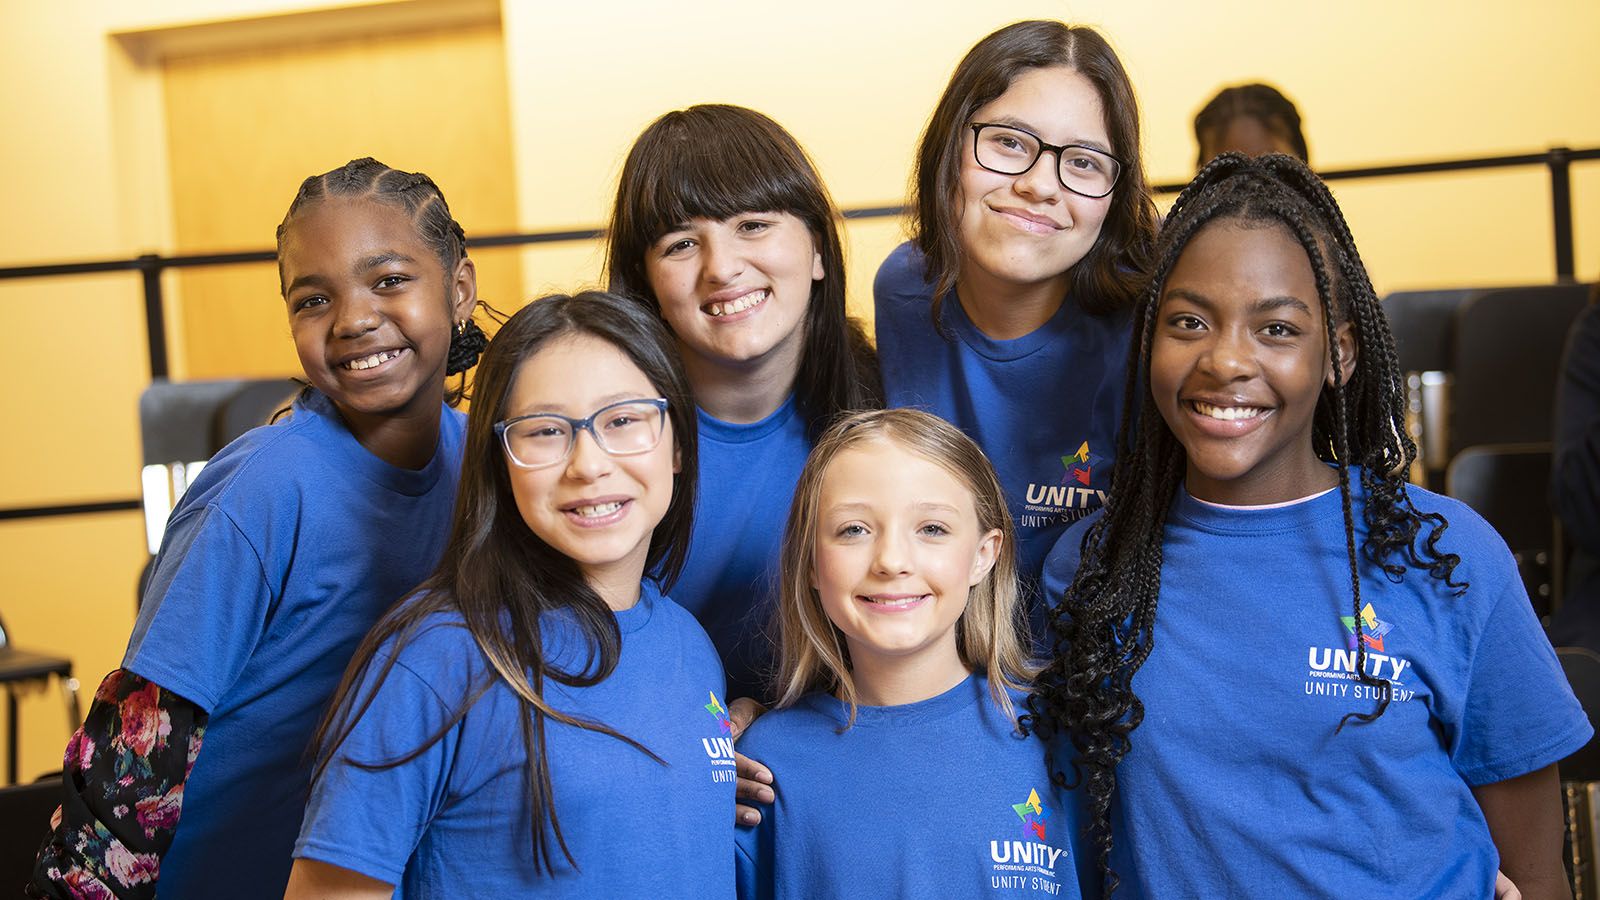 Unity Performing Arts Foundation's Voices of Unity Youth Choir will perform a Rise Up Concert on Saturday, June 22, at PFW Music Center ahead of their trip to Auckland, New Zealand, for the World Choir Games in July.